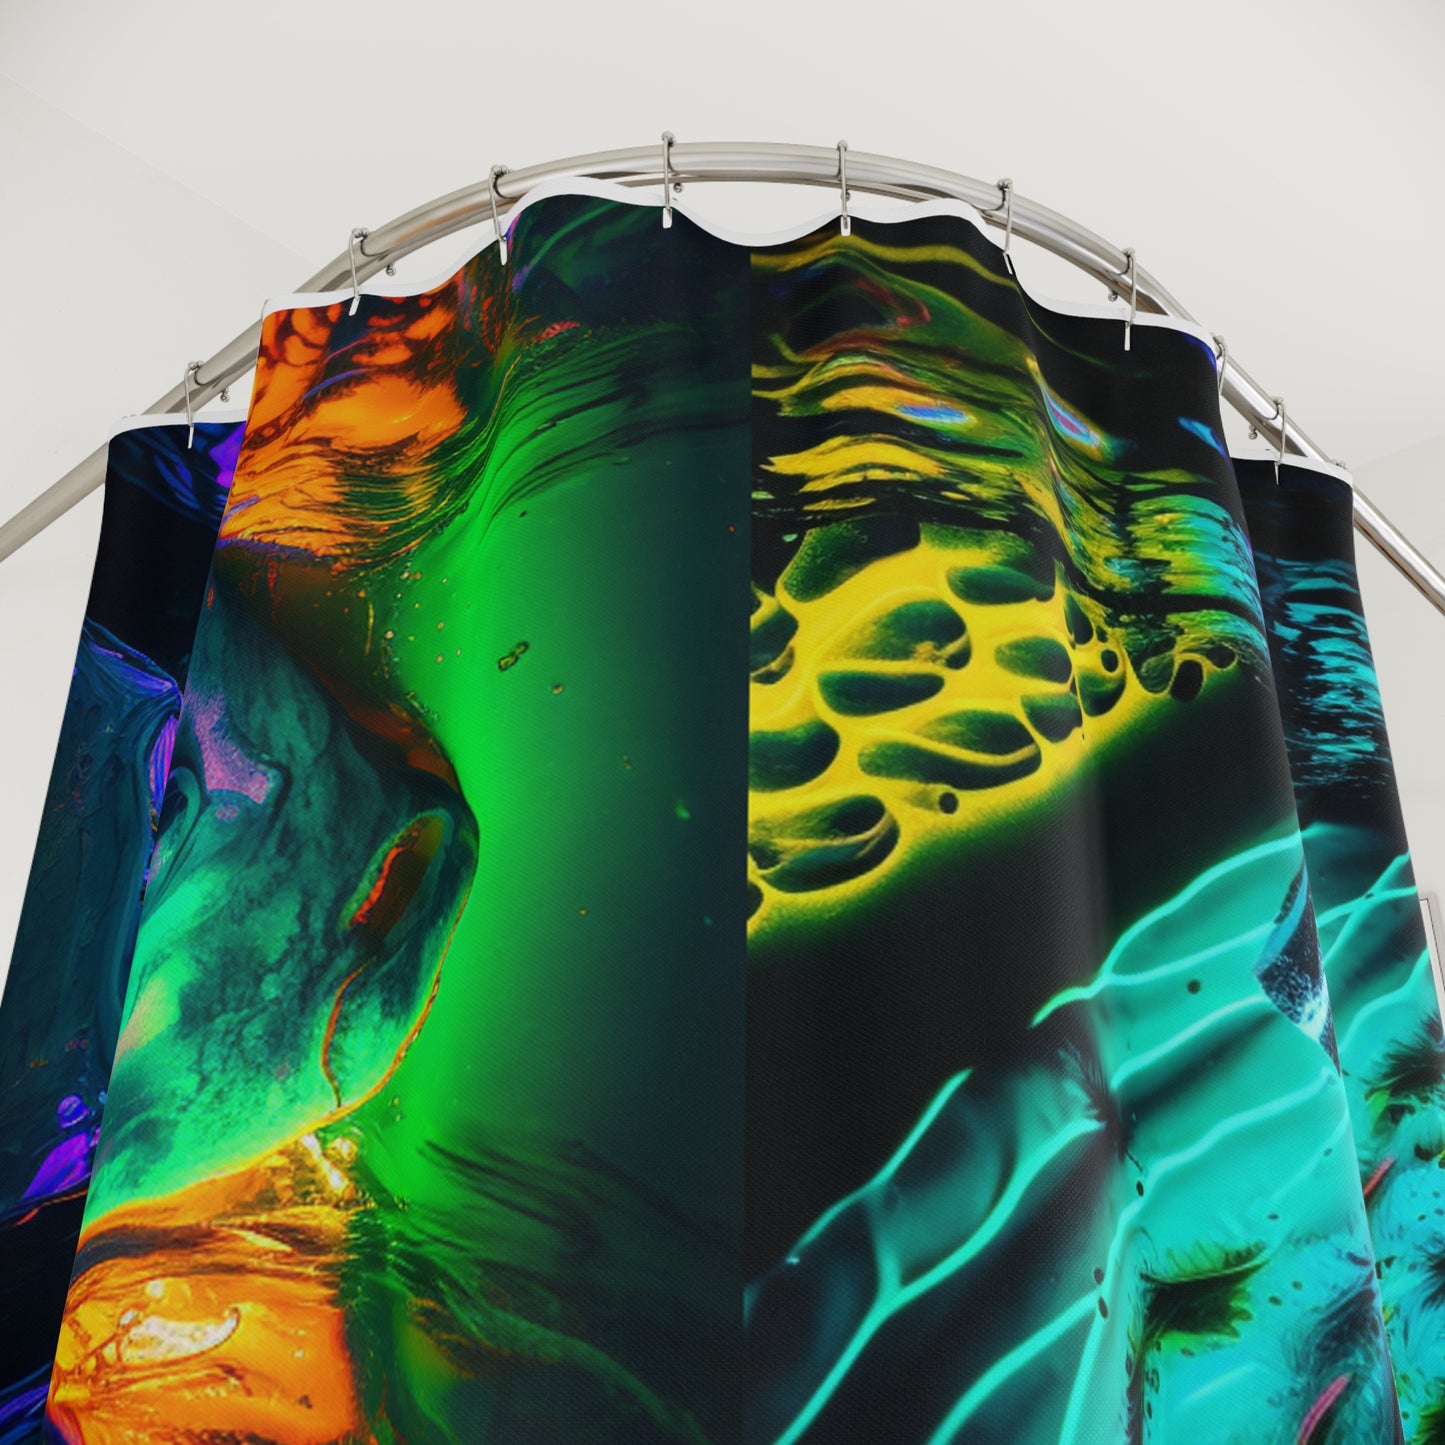 Polyester Shower Curtain Florescent Glow 5